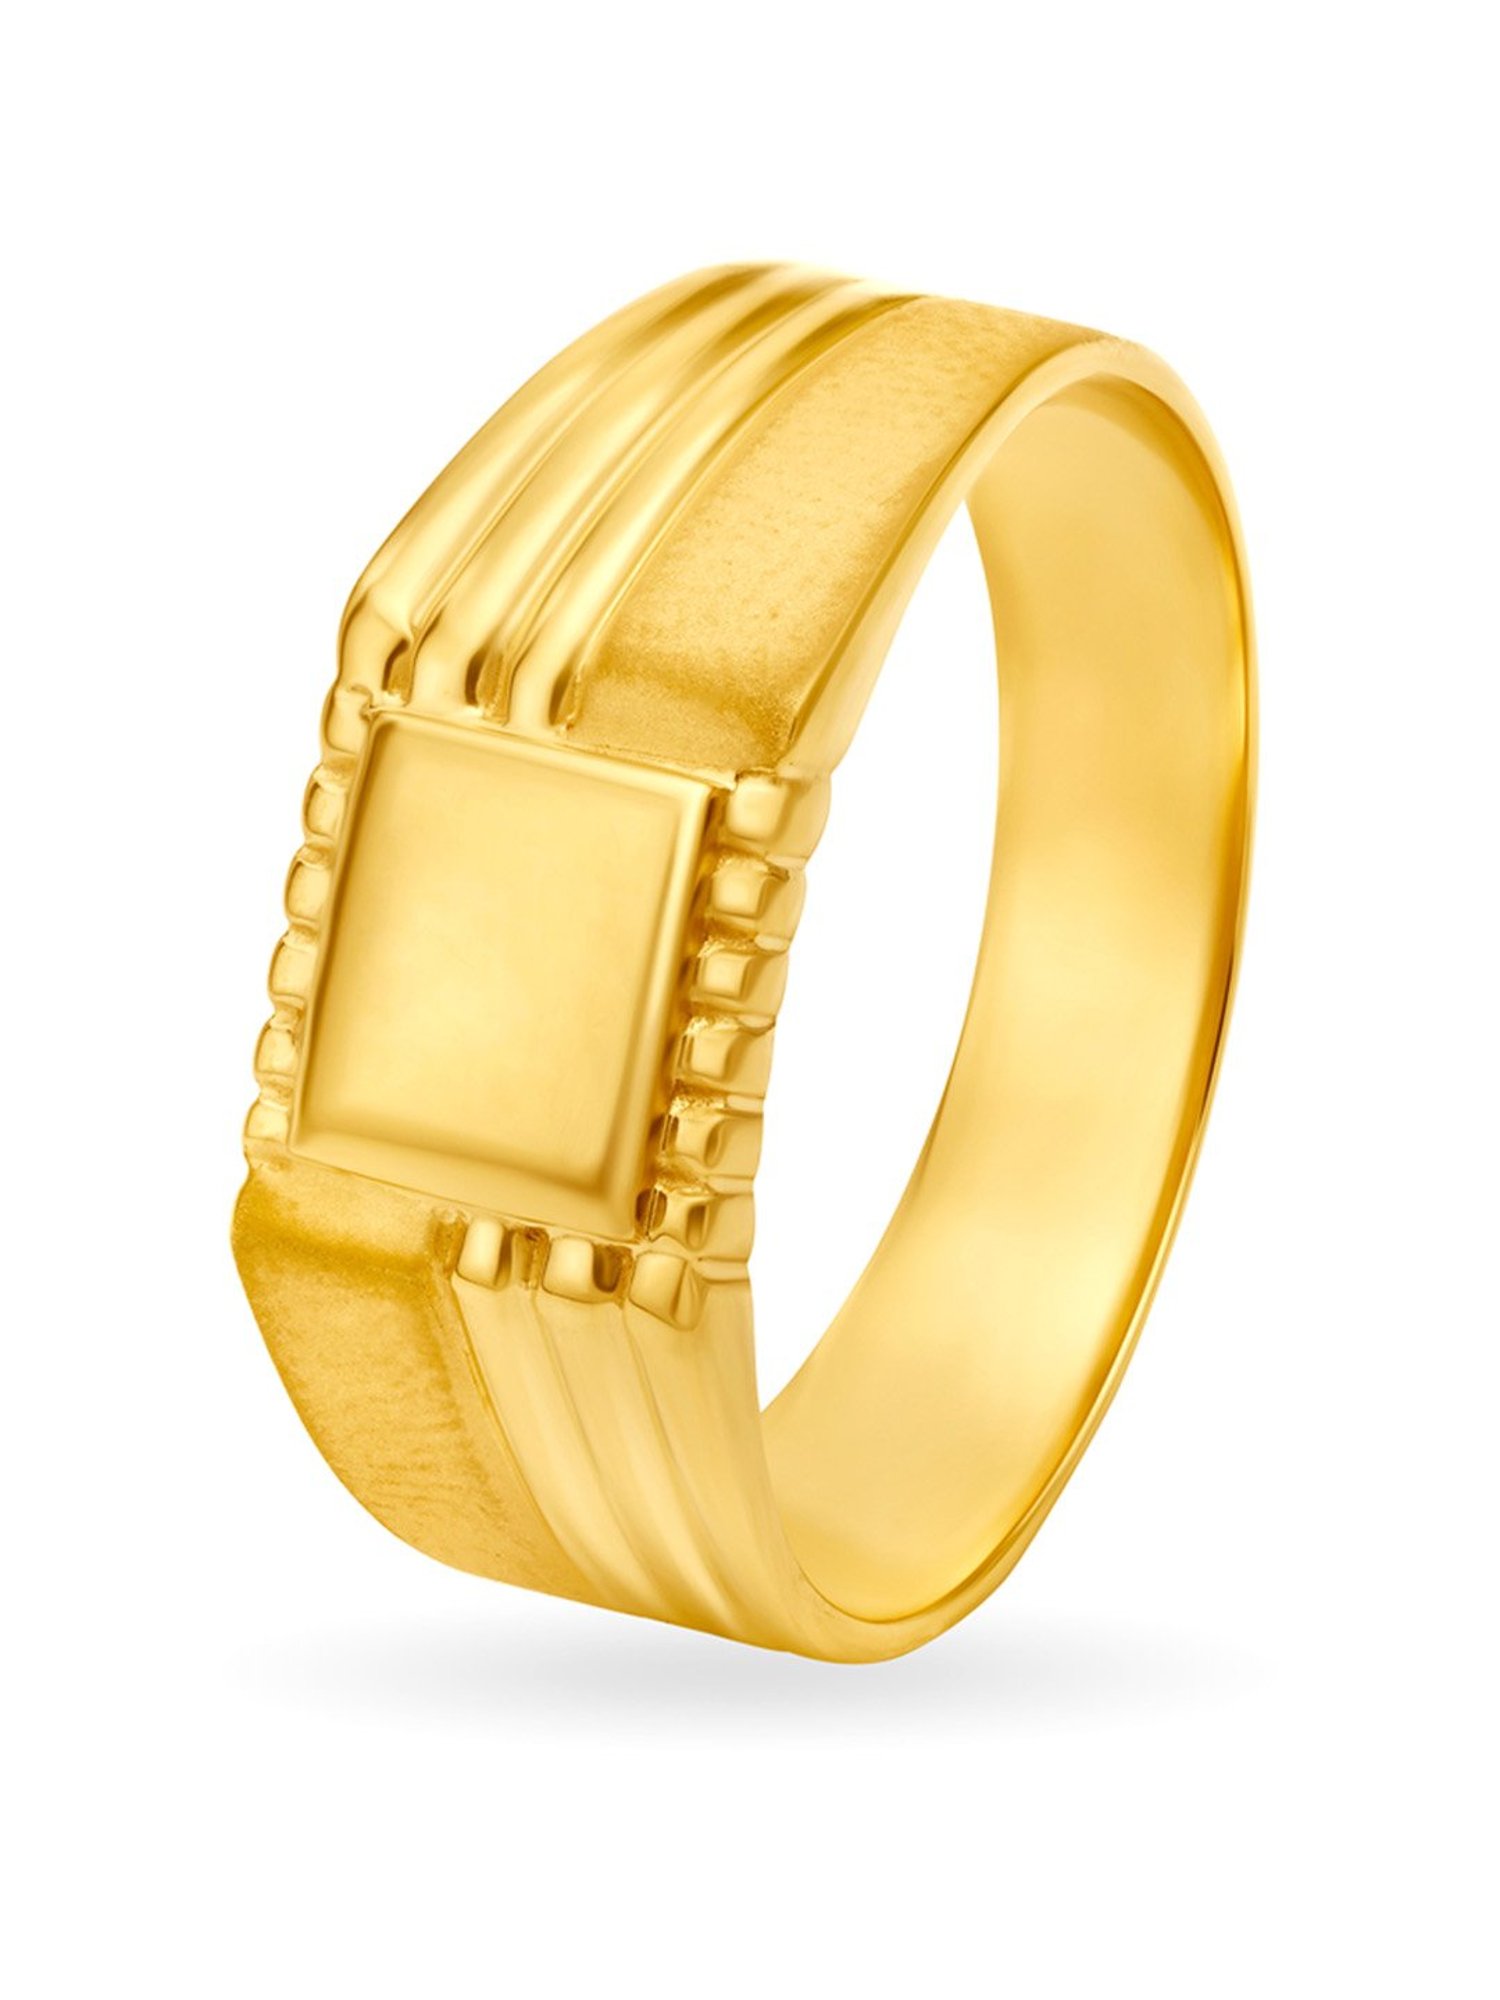 Gold Rings For Men With Price In Tanishq